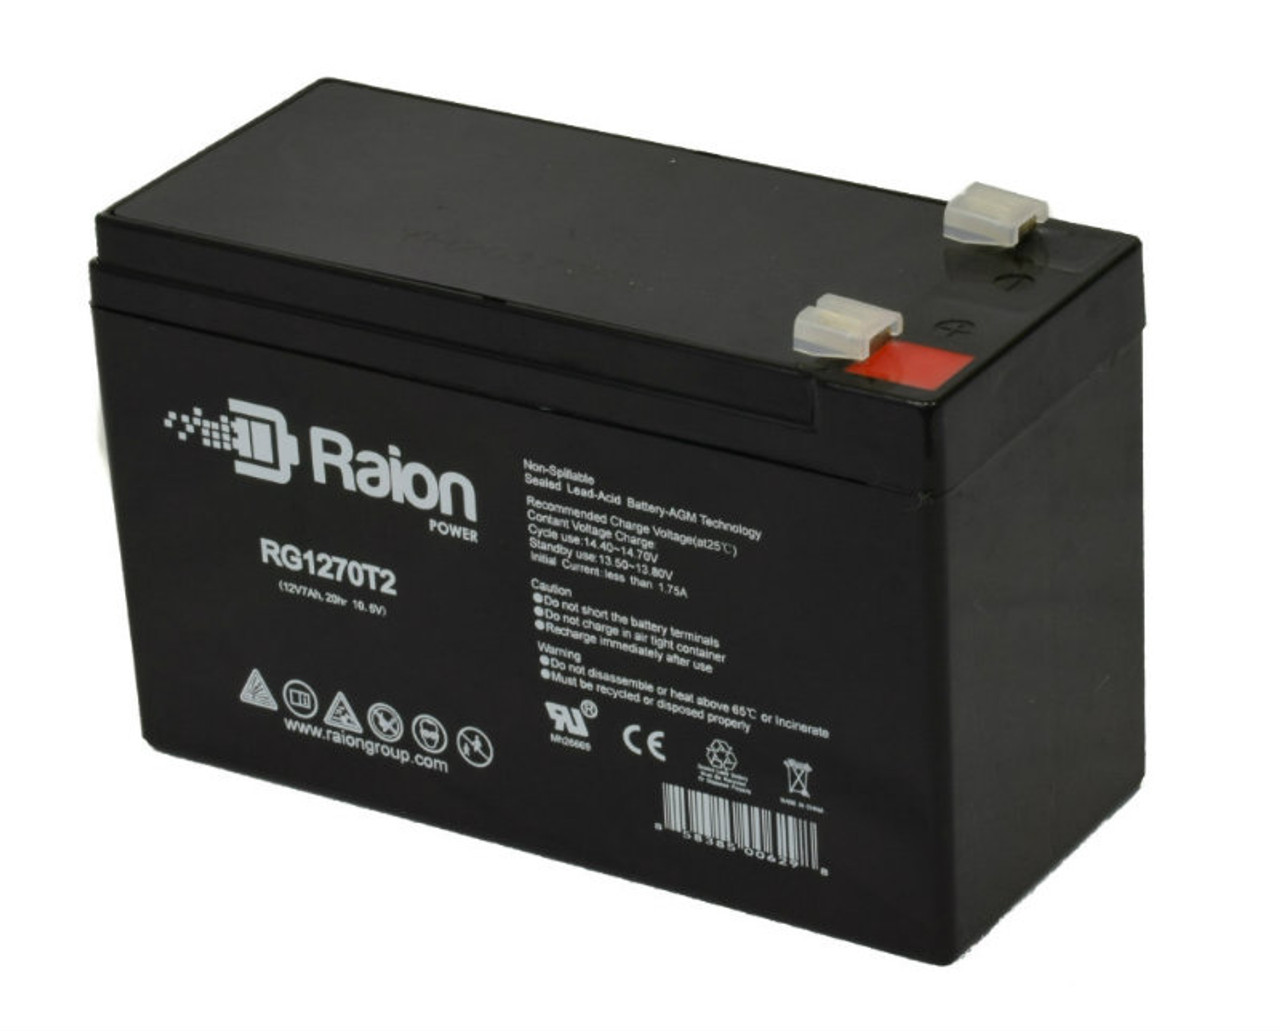 Raion Power RG1270T1 12V 7Ah Non-Spillable Replacement Battery for Renogy RNG-BATT-AGM12-7 F1